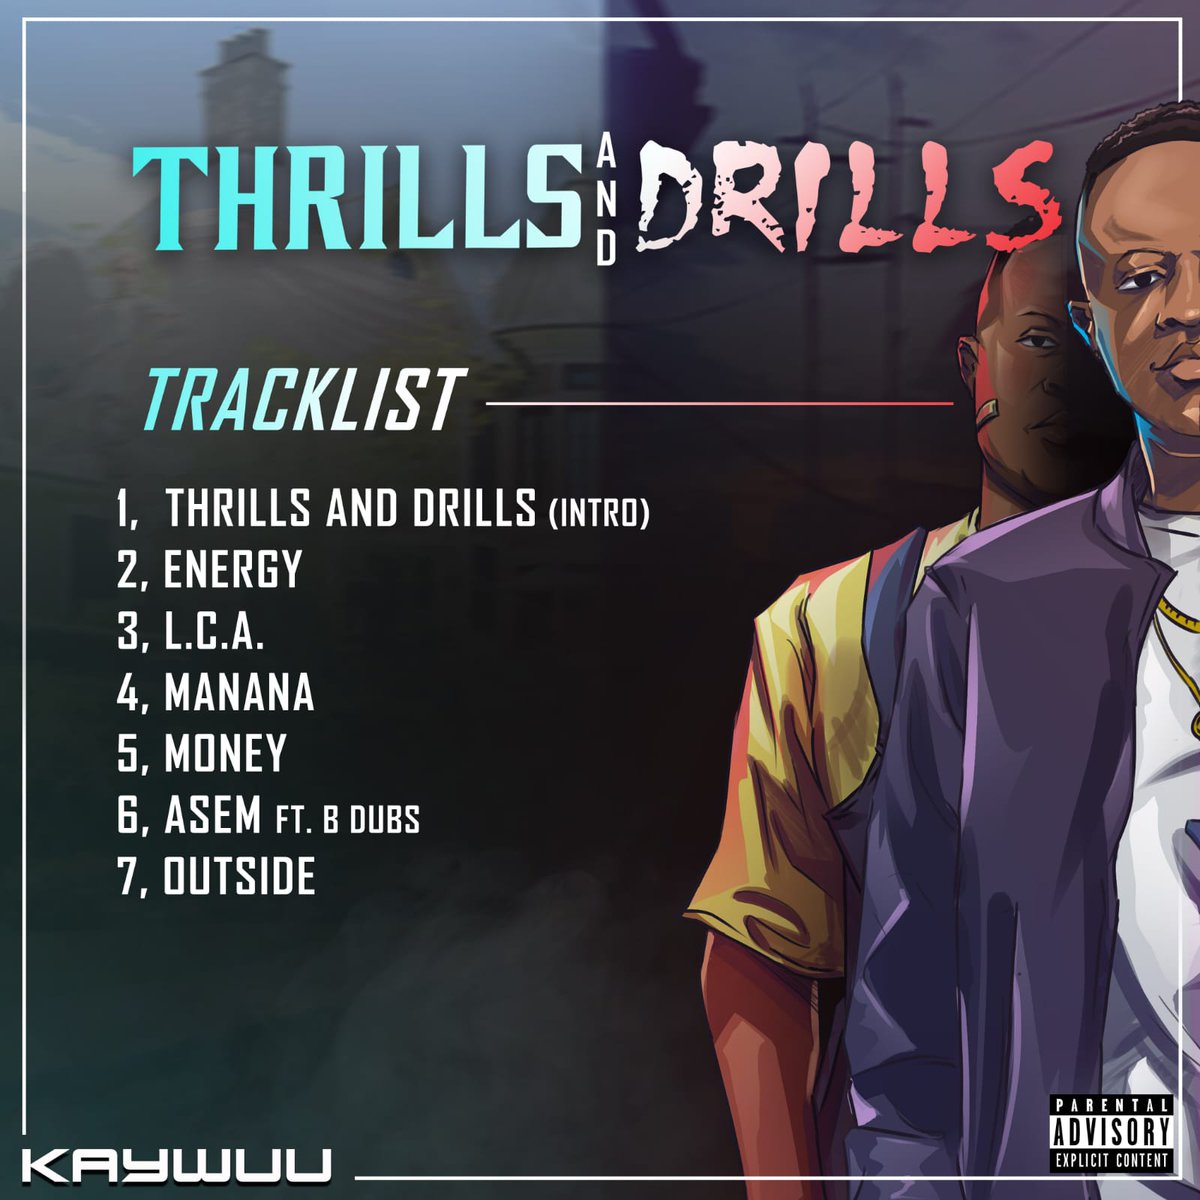 Guy check this out 
#ThrillsAndDrillsEP